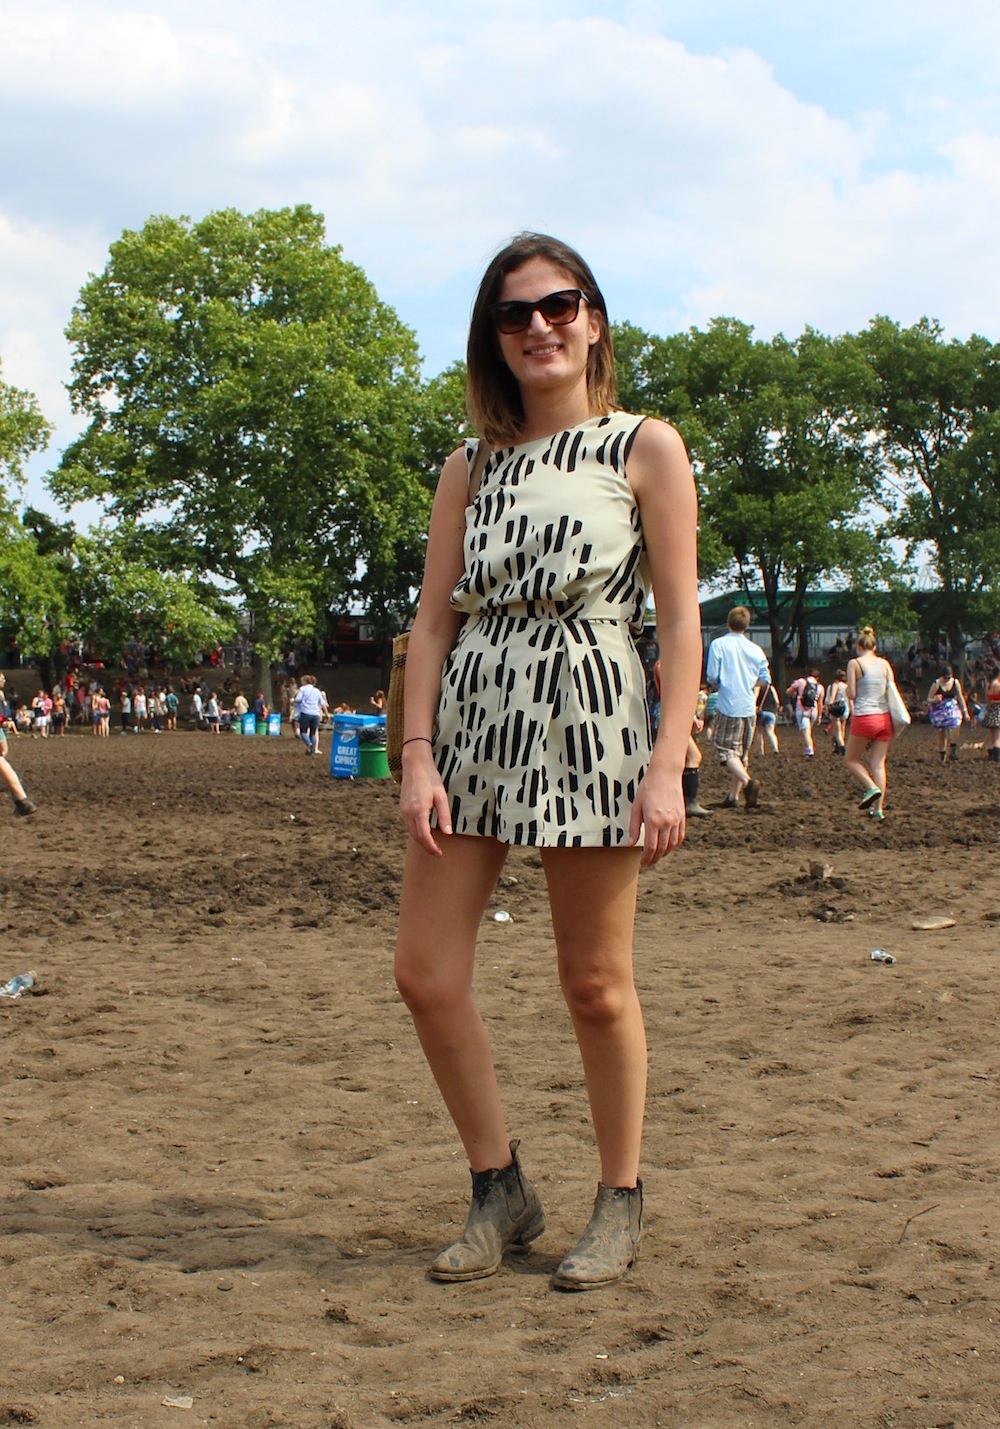 Tina from Australia at Governors Ball 2013 Style